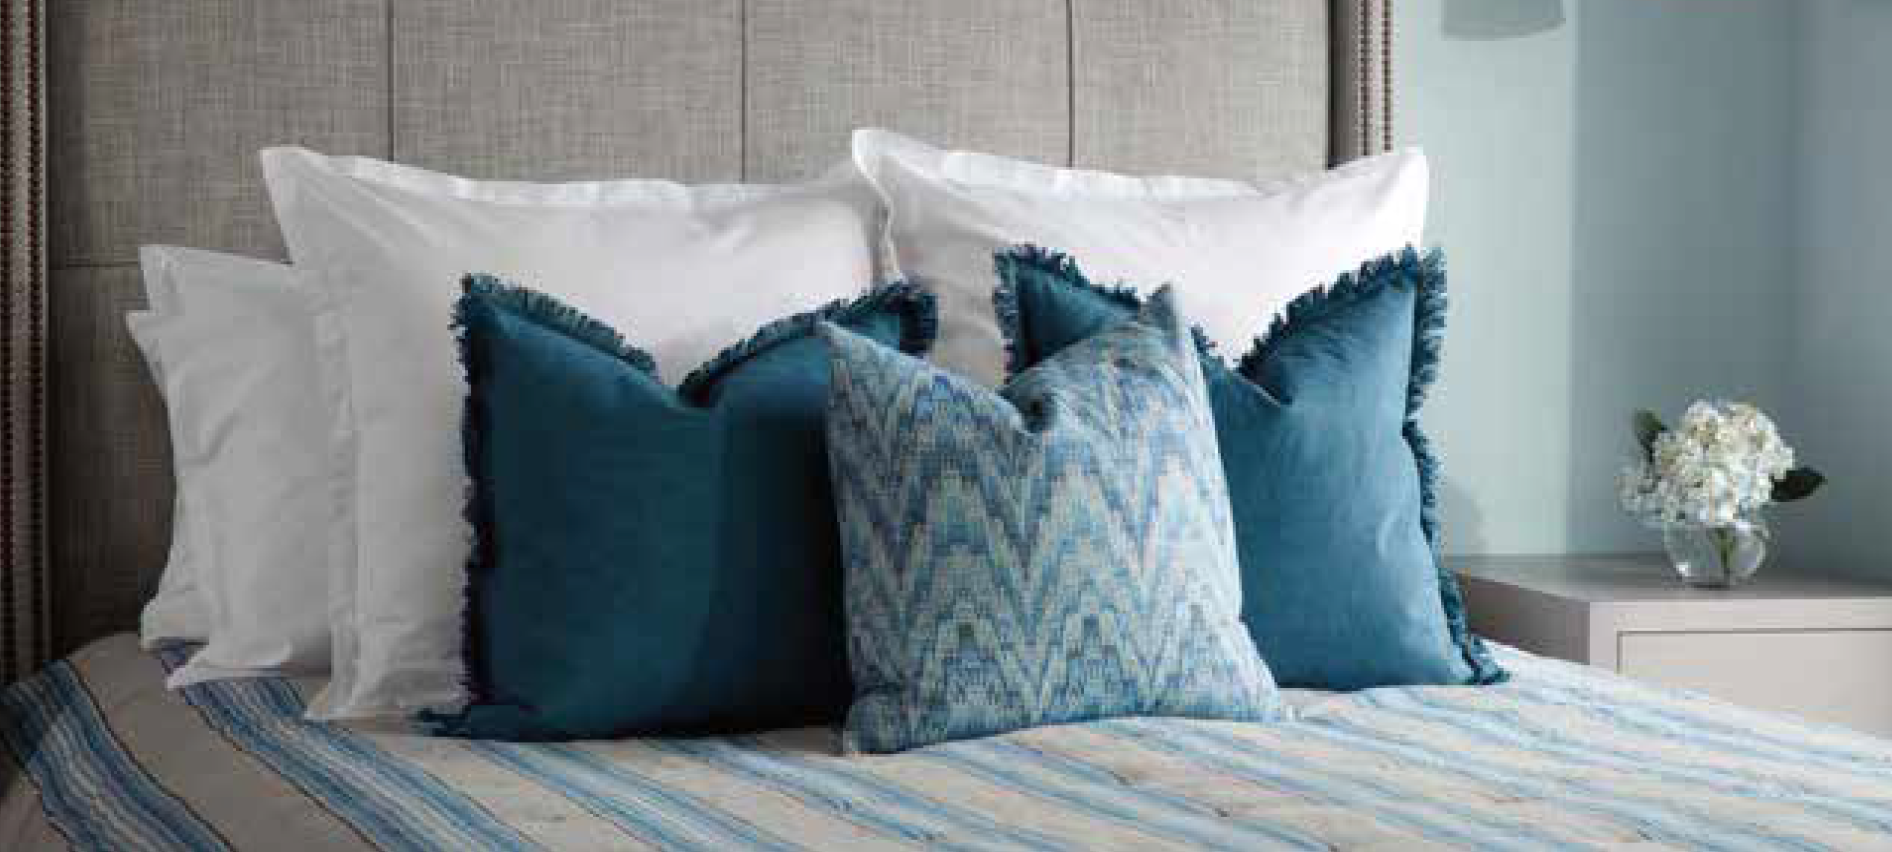 Blue and White Pillows on a bed